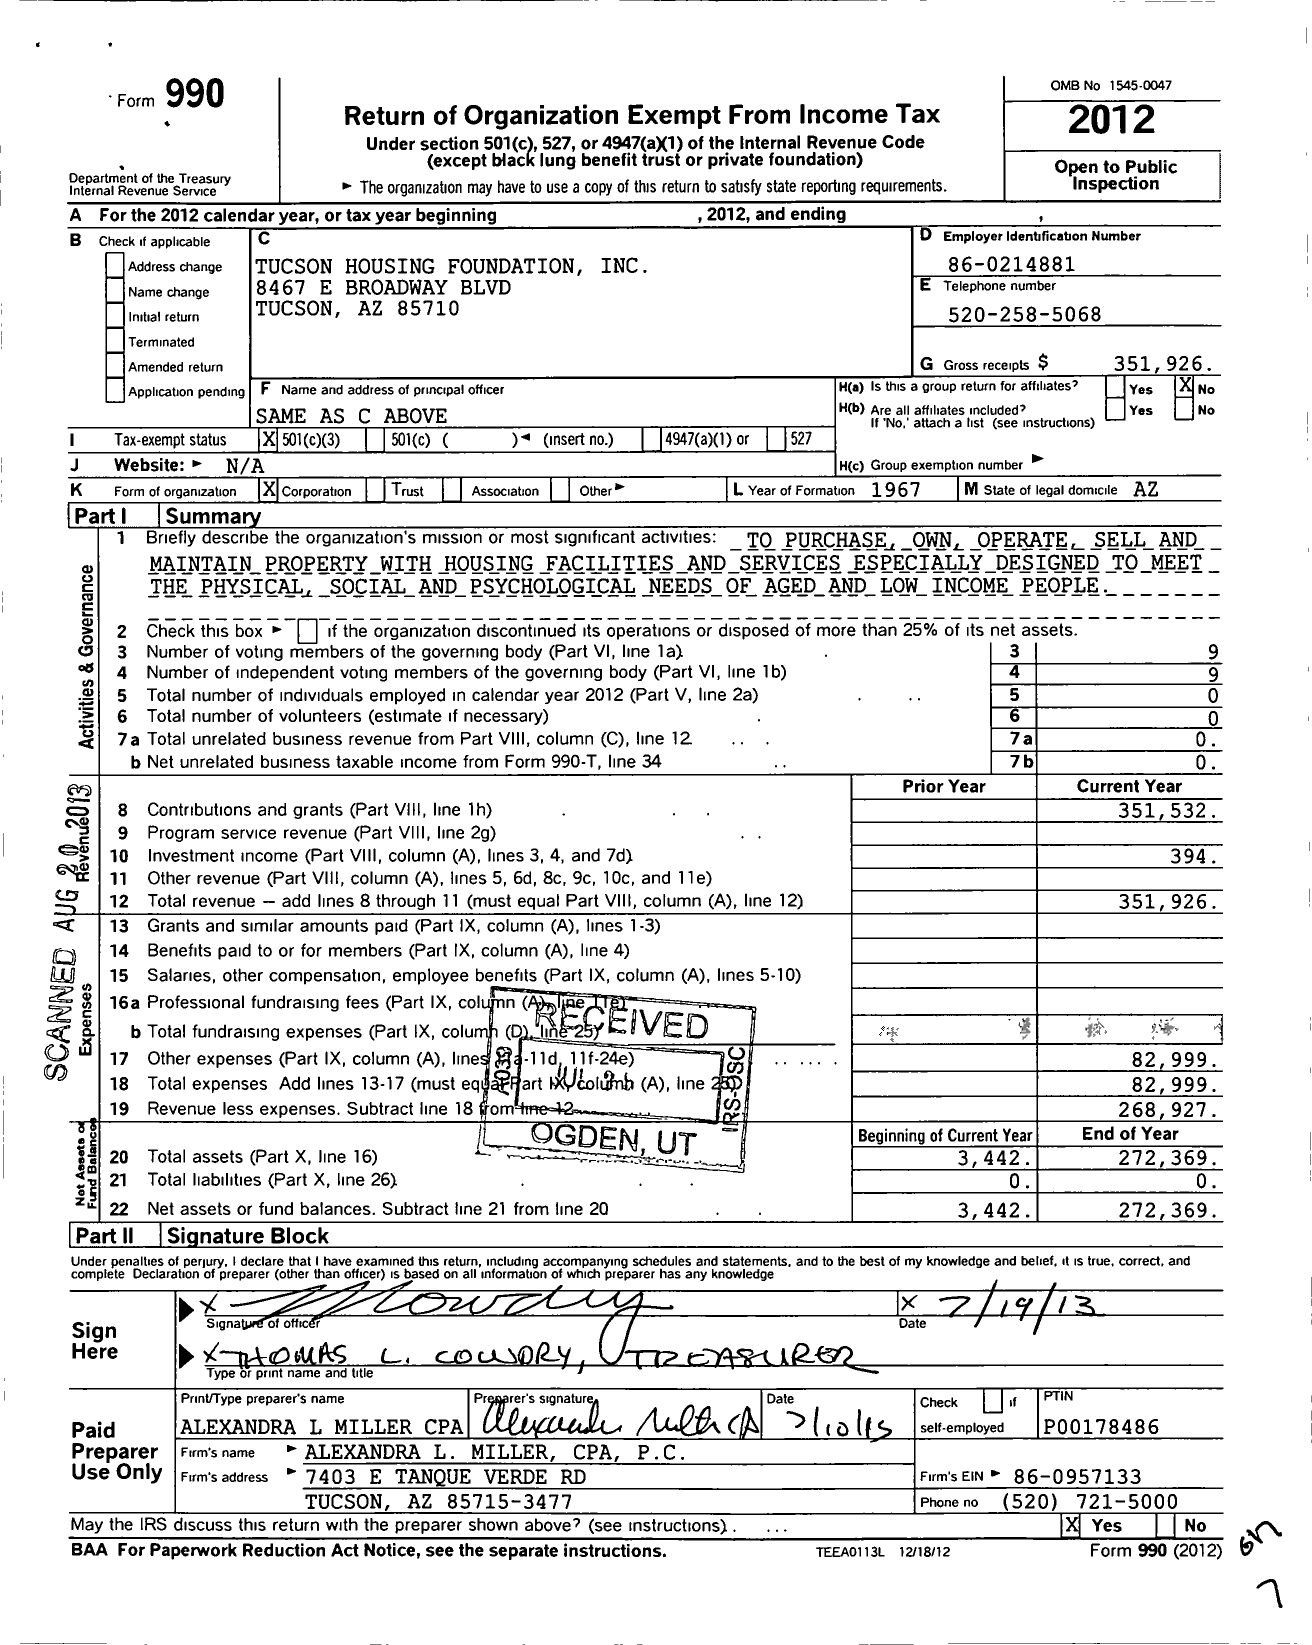 Image of first page of 2012 Form 990 for Tucson Housing Foundation